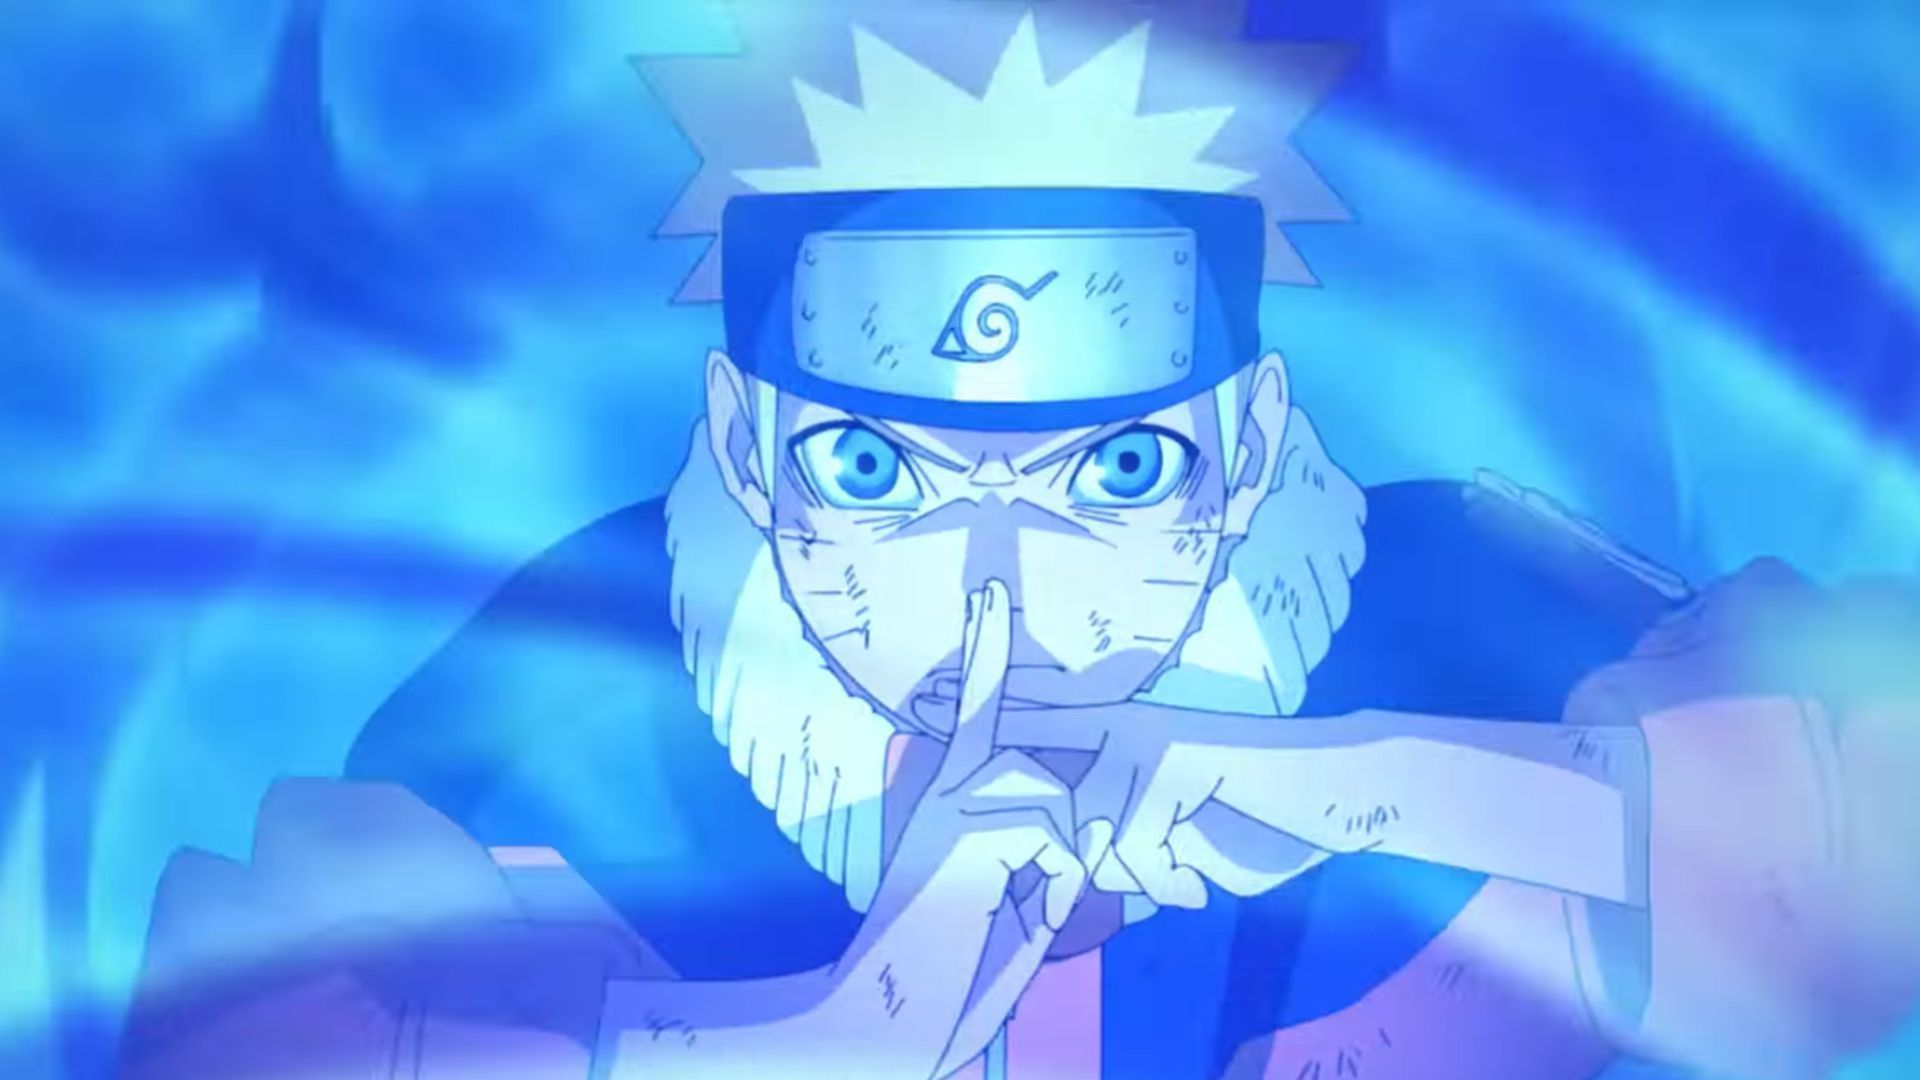 New Naruto anime confirmed to feature original team 7